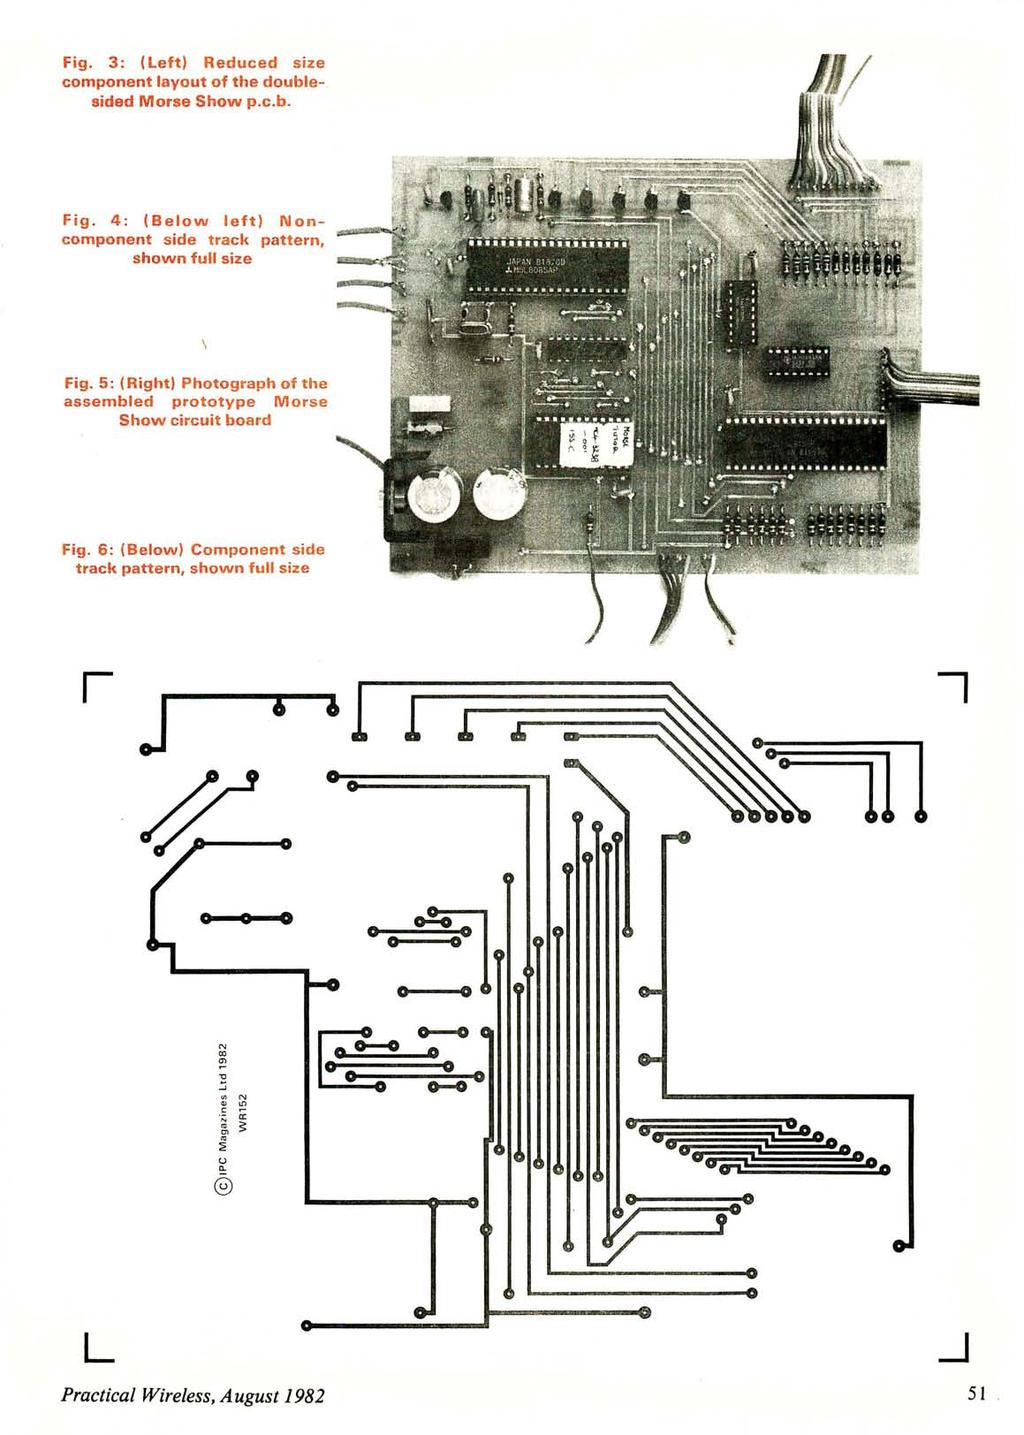 www.americanradiohistory.com Fig. 3: (Left) Reduced size component layout of the doublesided Morse Show p.c.b. Fig. 4: (Below left) Noncomponent side track pattern, shown full size Fig.